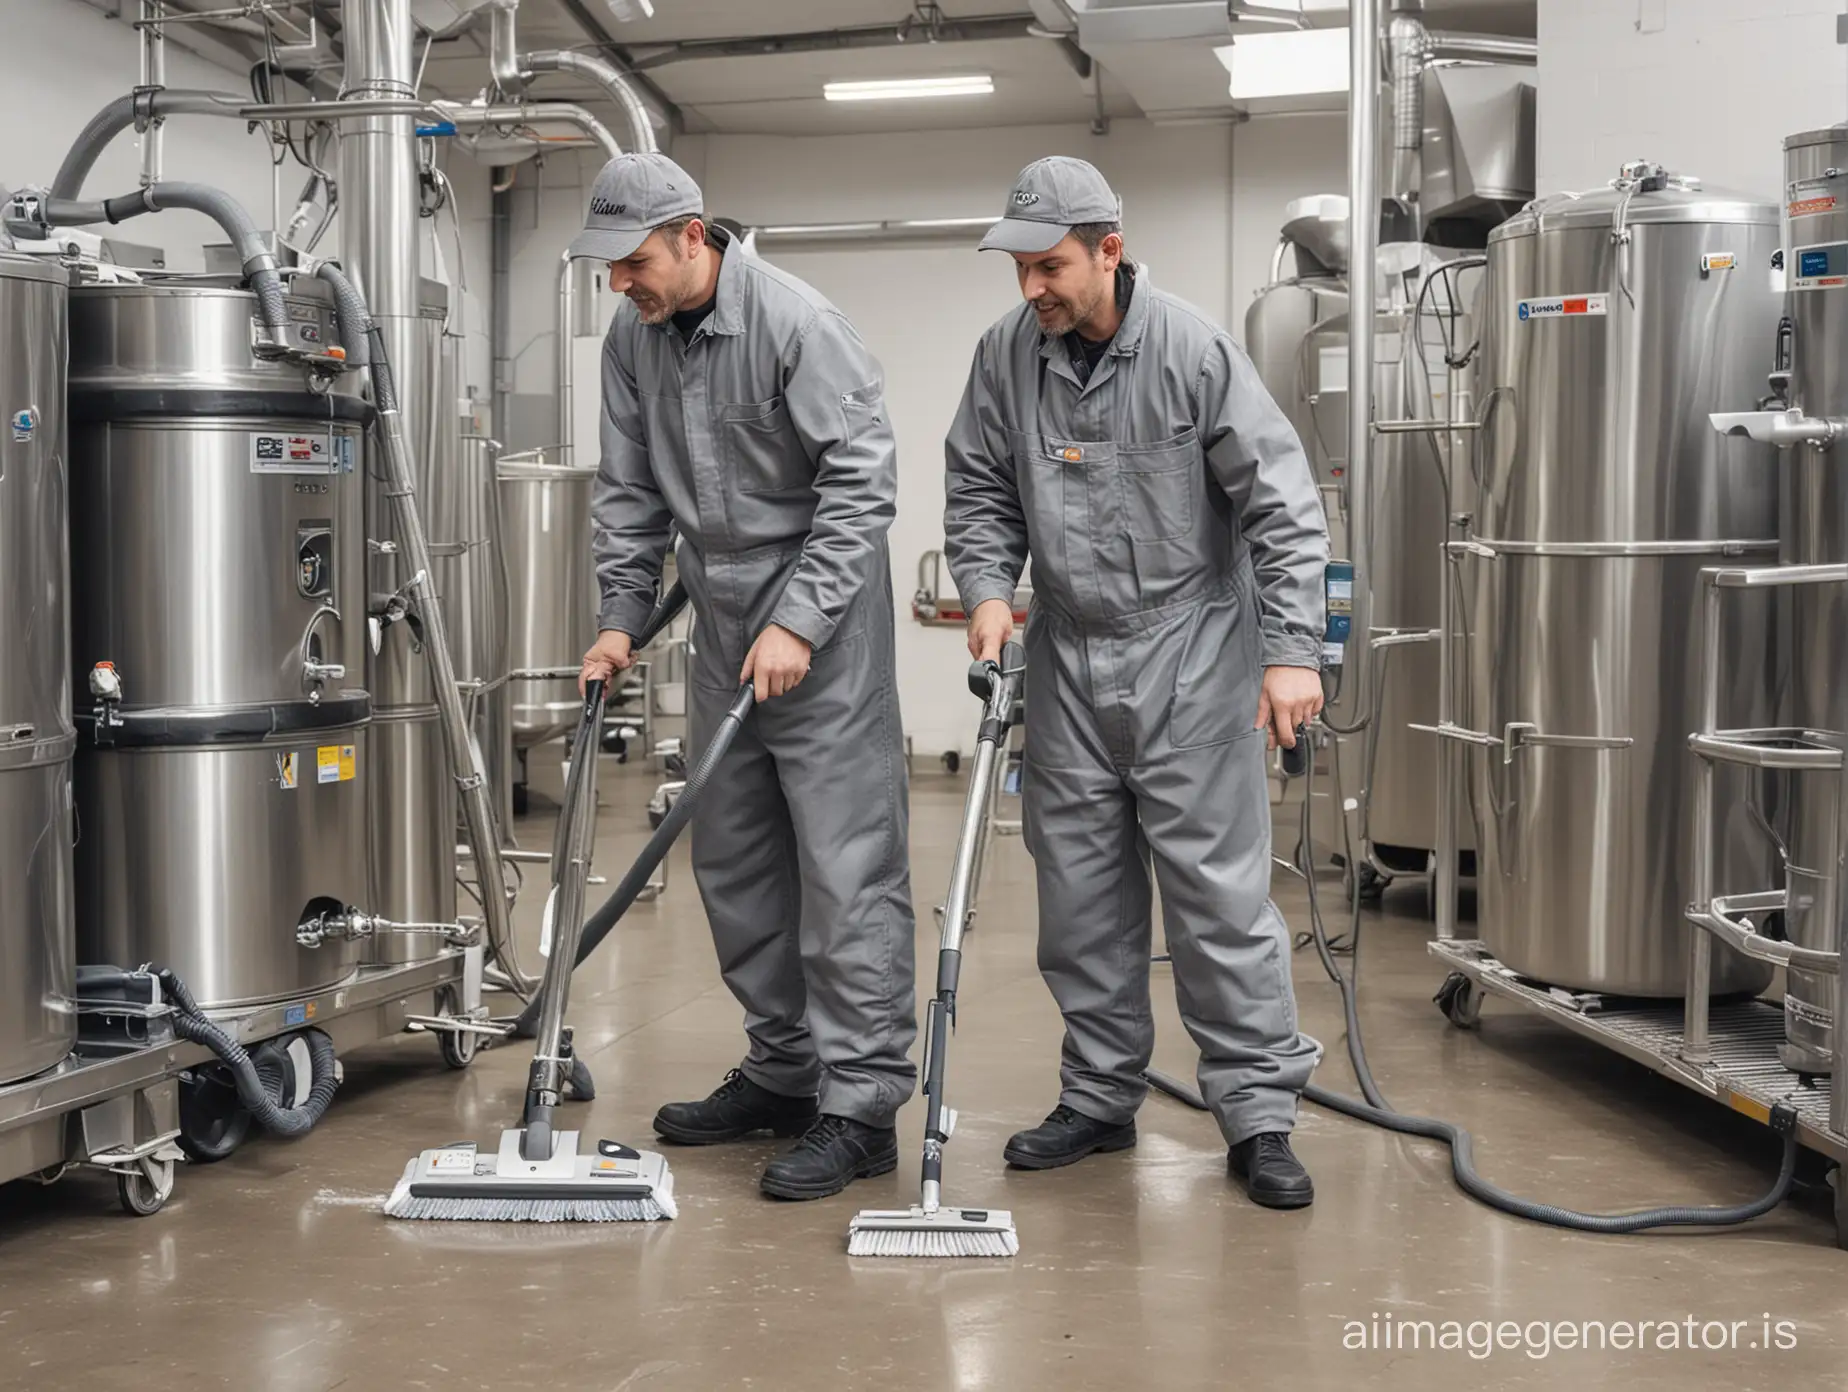 Industrial-Cleaners-in-Food-Workshop-with-Stainless-Steel-Tanks